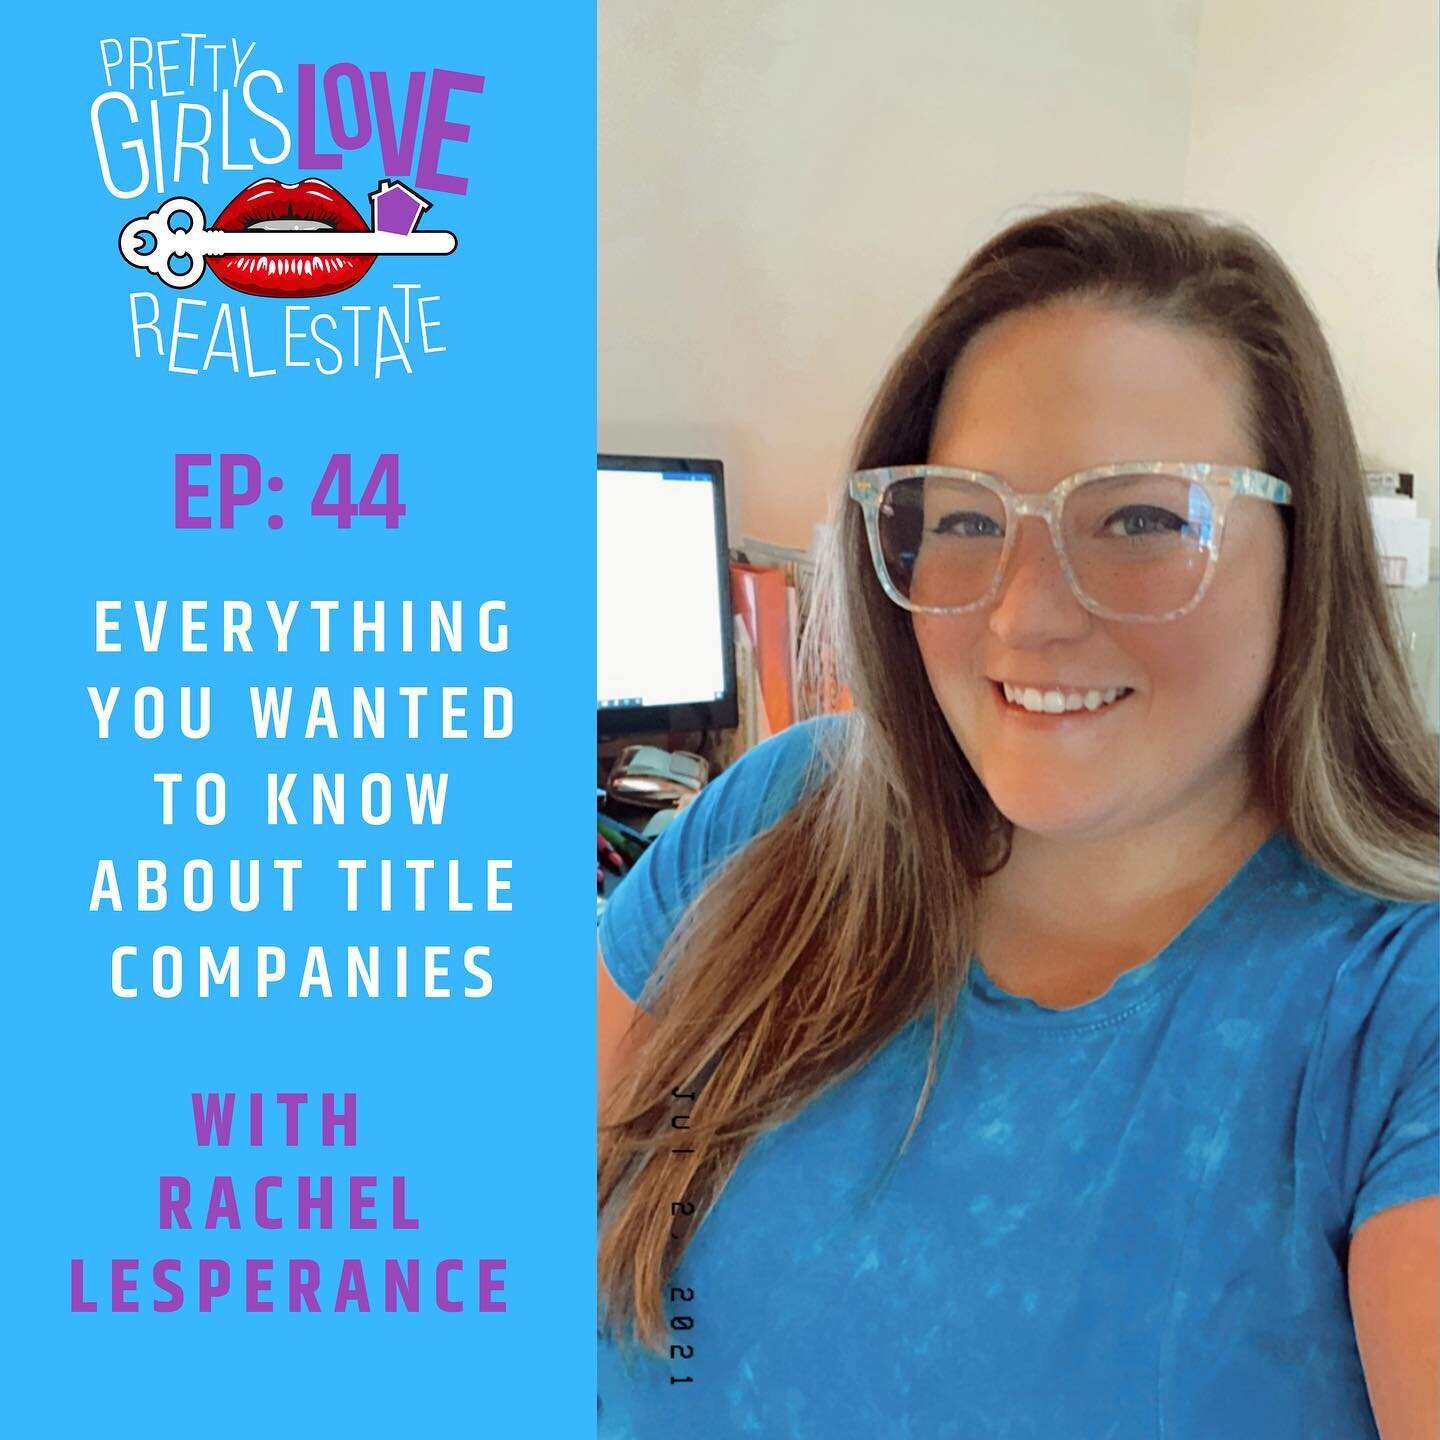 On episode 44 of @prettygirlsloverealestate, I chat with Rachel Lesperance, a paralegal with Res-Title based out of the Indianapolis, Indiana area. During our conversation we discuss:&nbsp;

- the state of the title industry during the pandemic and b